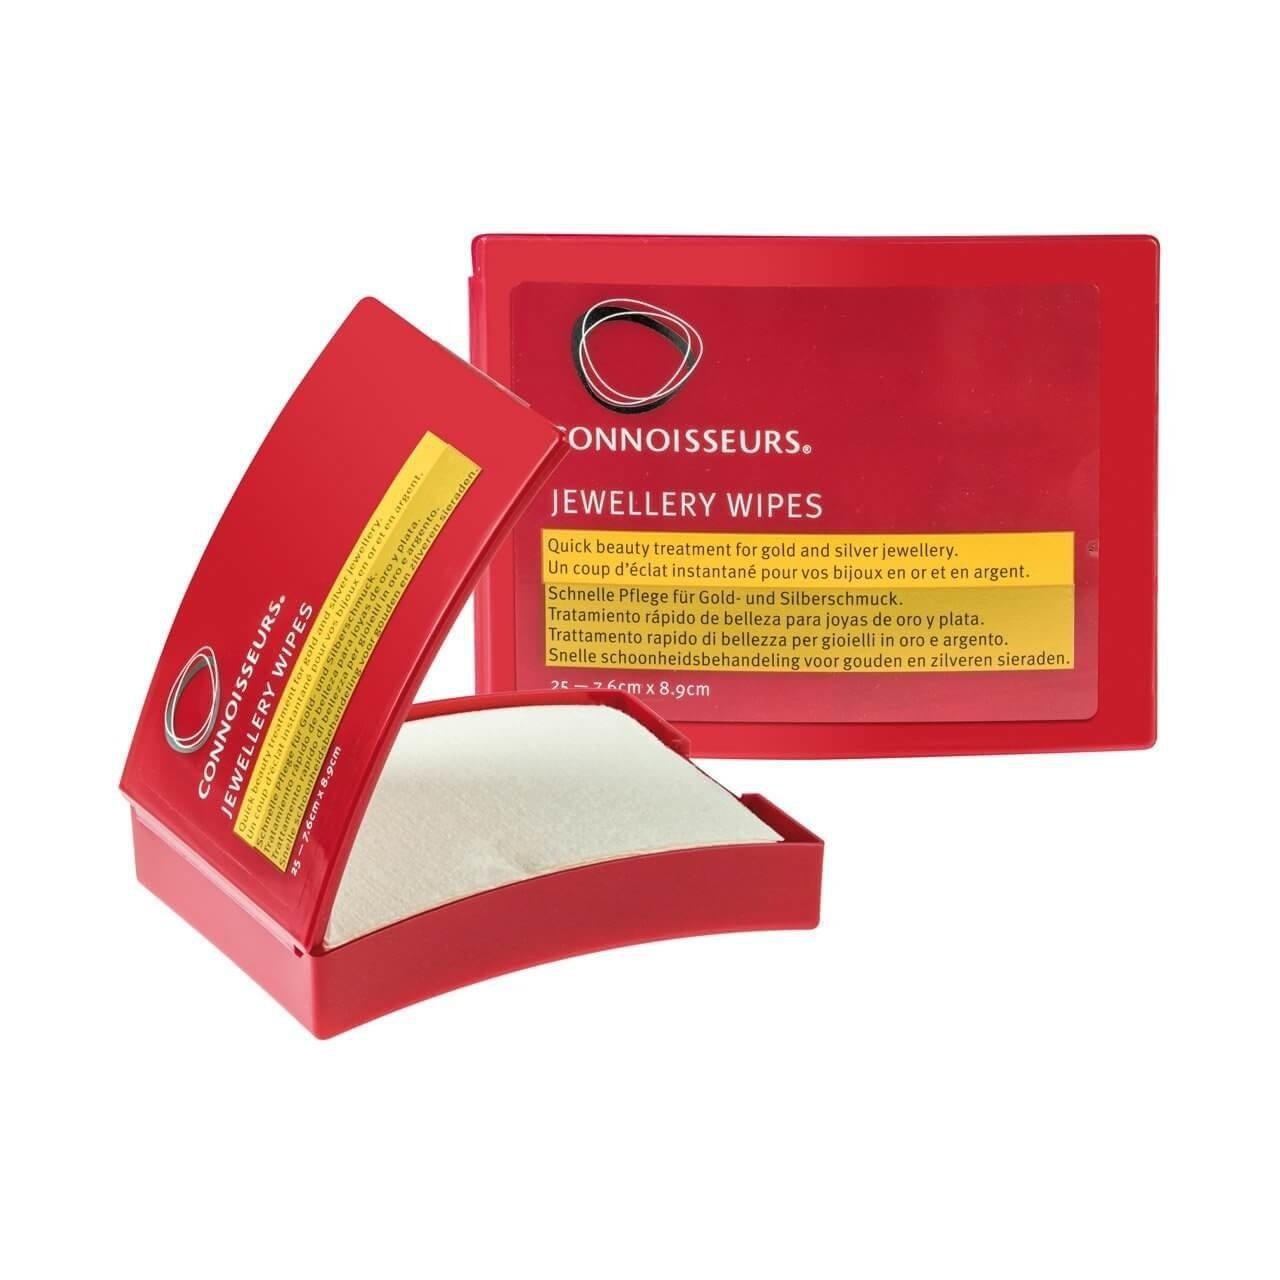 Connaisseurs Jewelry Wipes